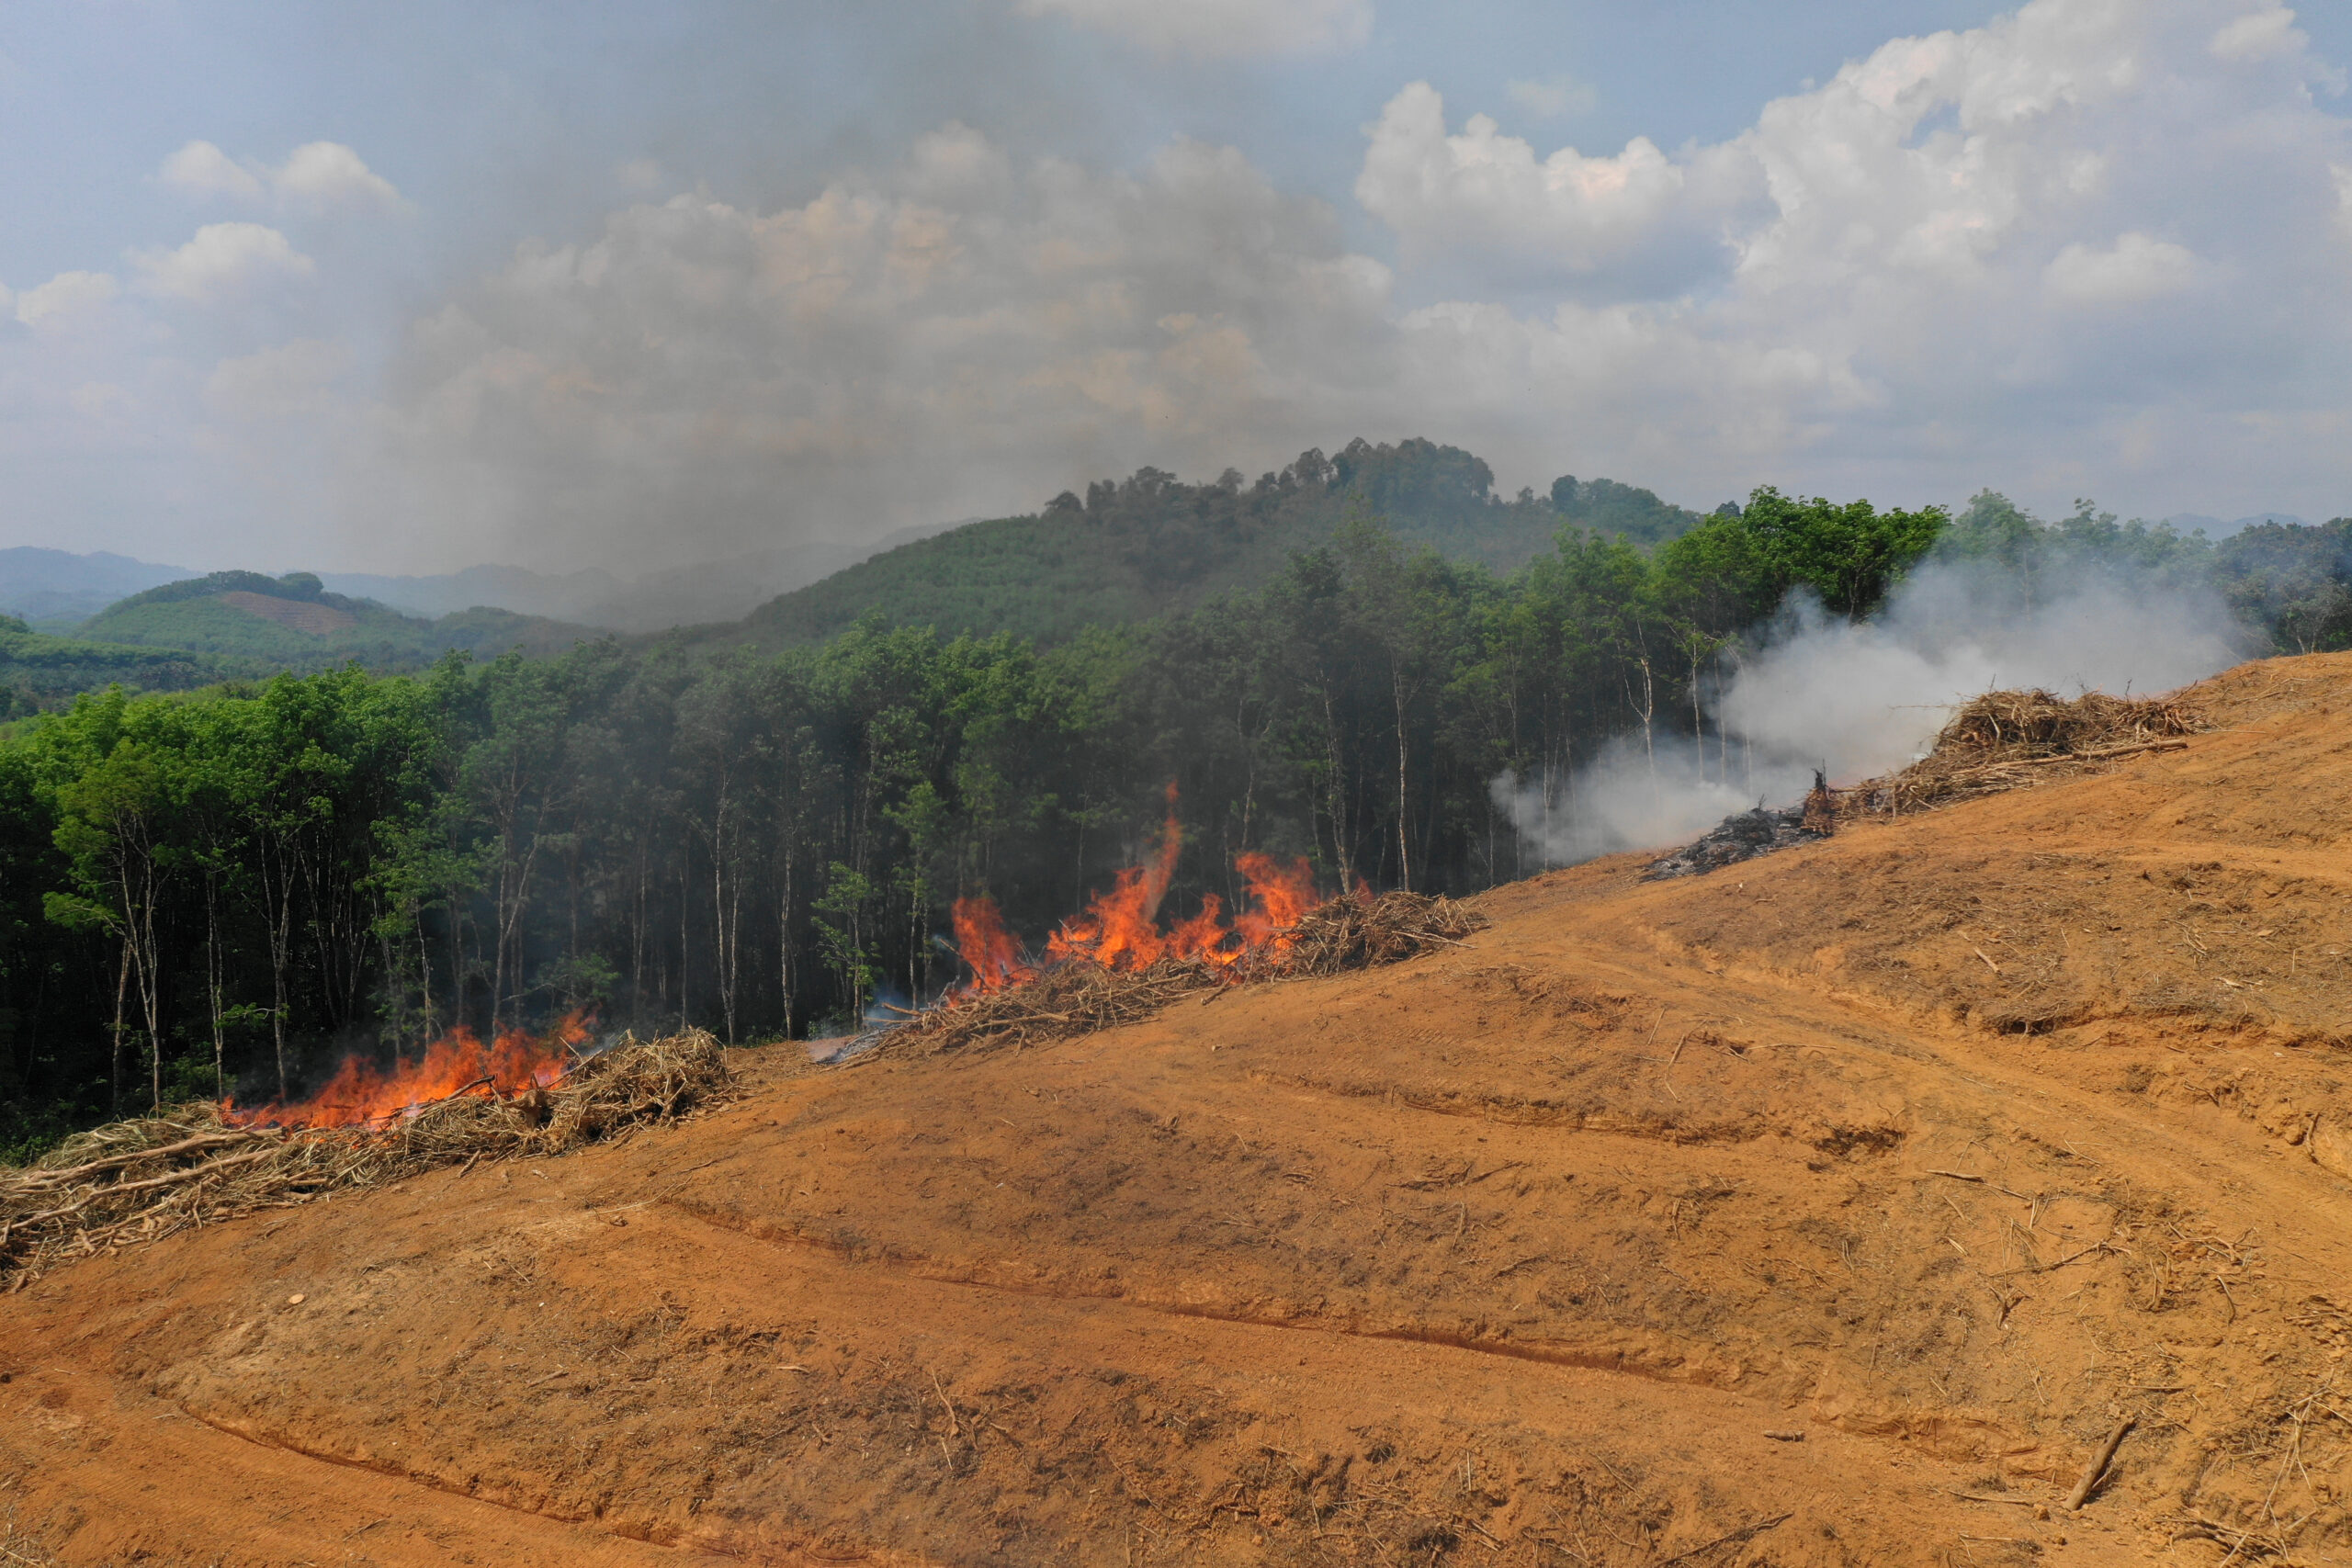 Universal Forest License Could Multiply Environmental Issues in Indonesia